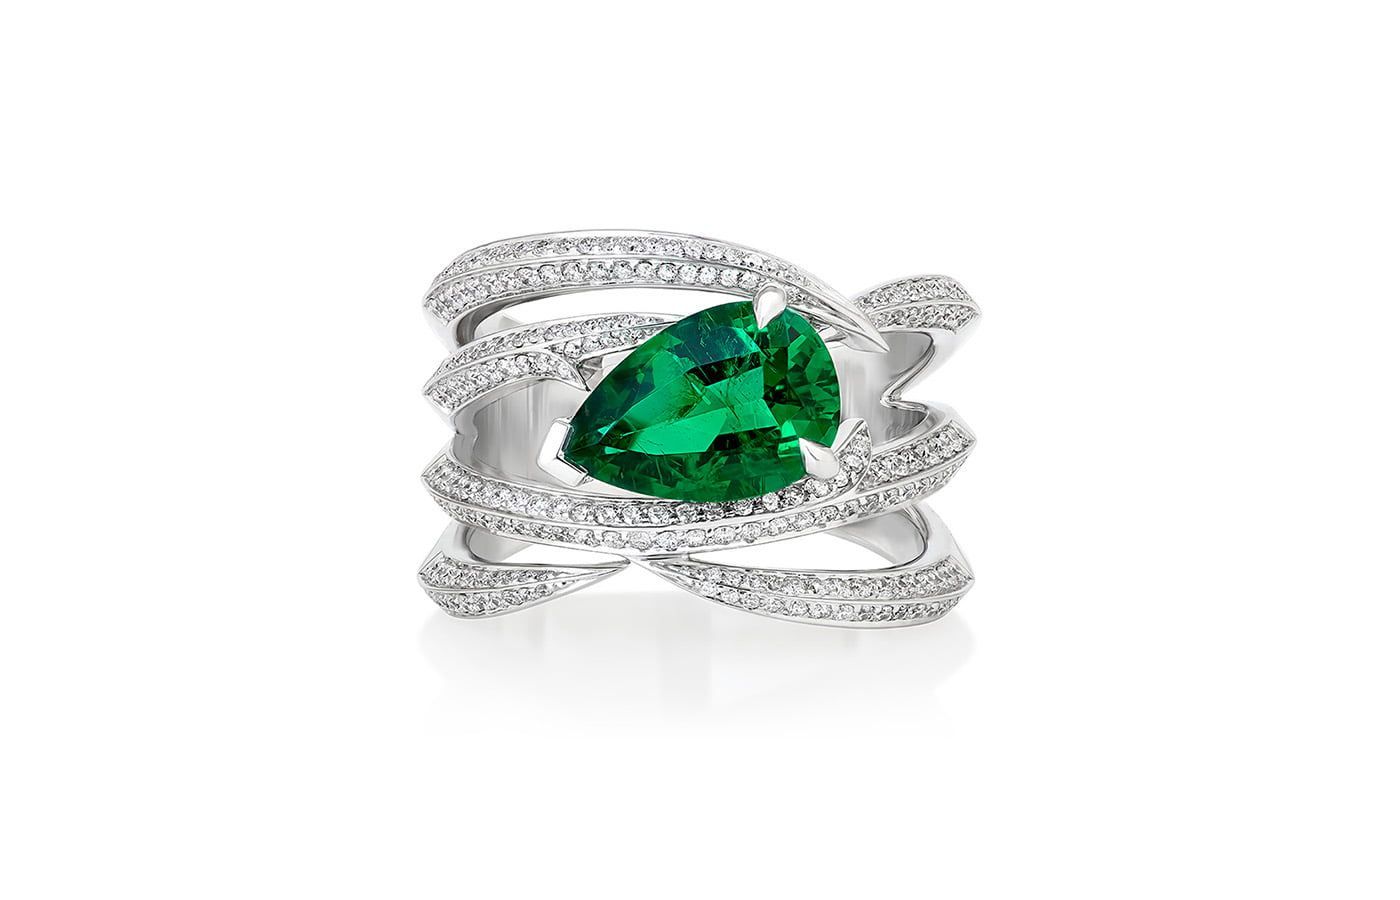 Stephen Webster Thorn Embrace diamond and Muzo emerald ring